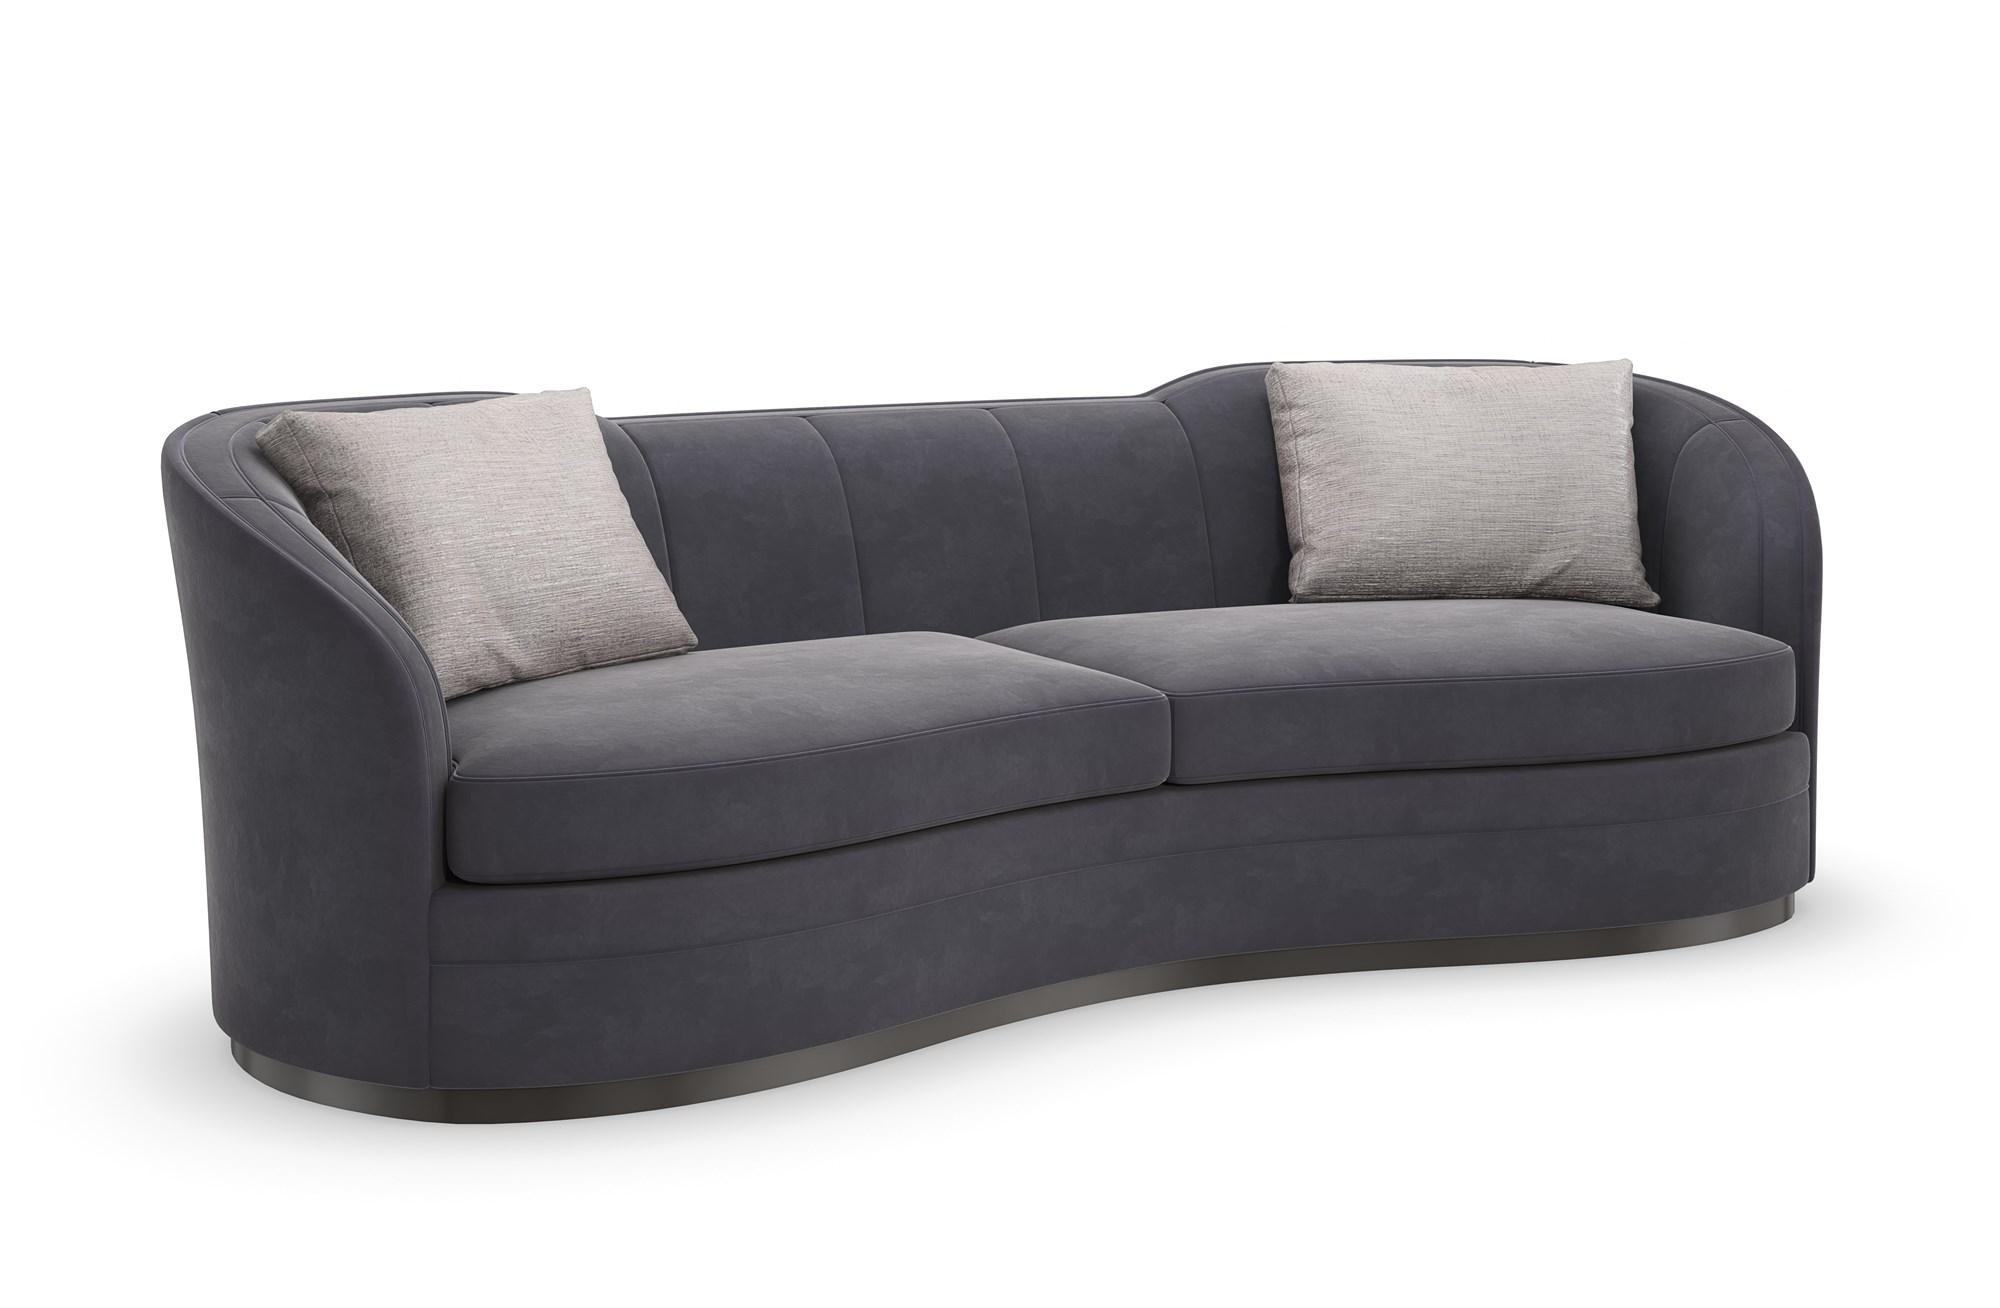 Contemporary Sofa ECLIPSE SOFA UPH-422-013-A in Charcoal Fabric